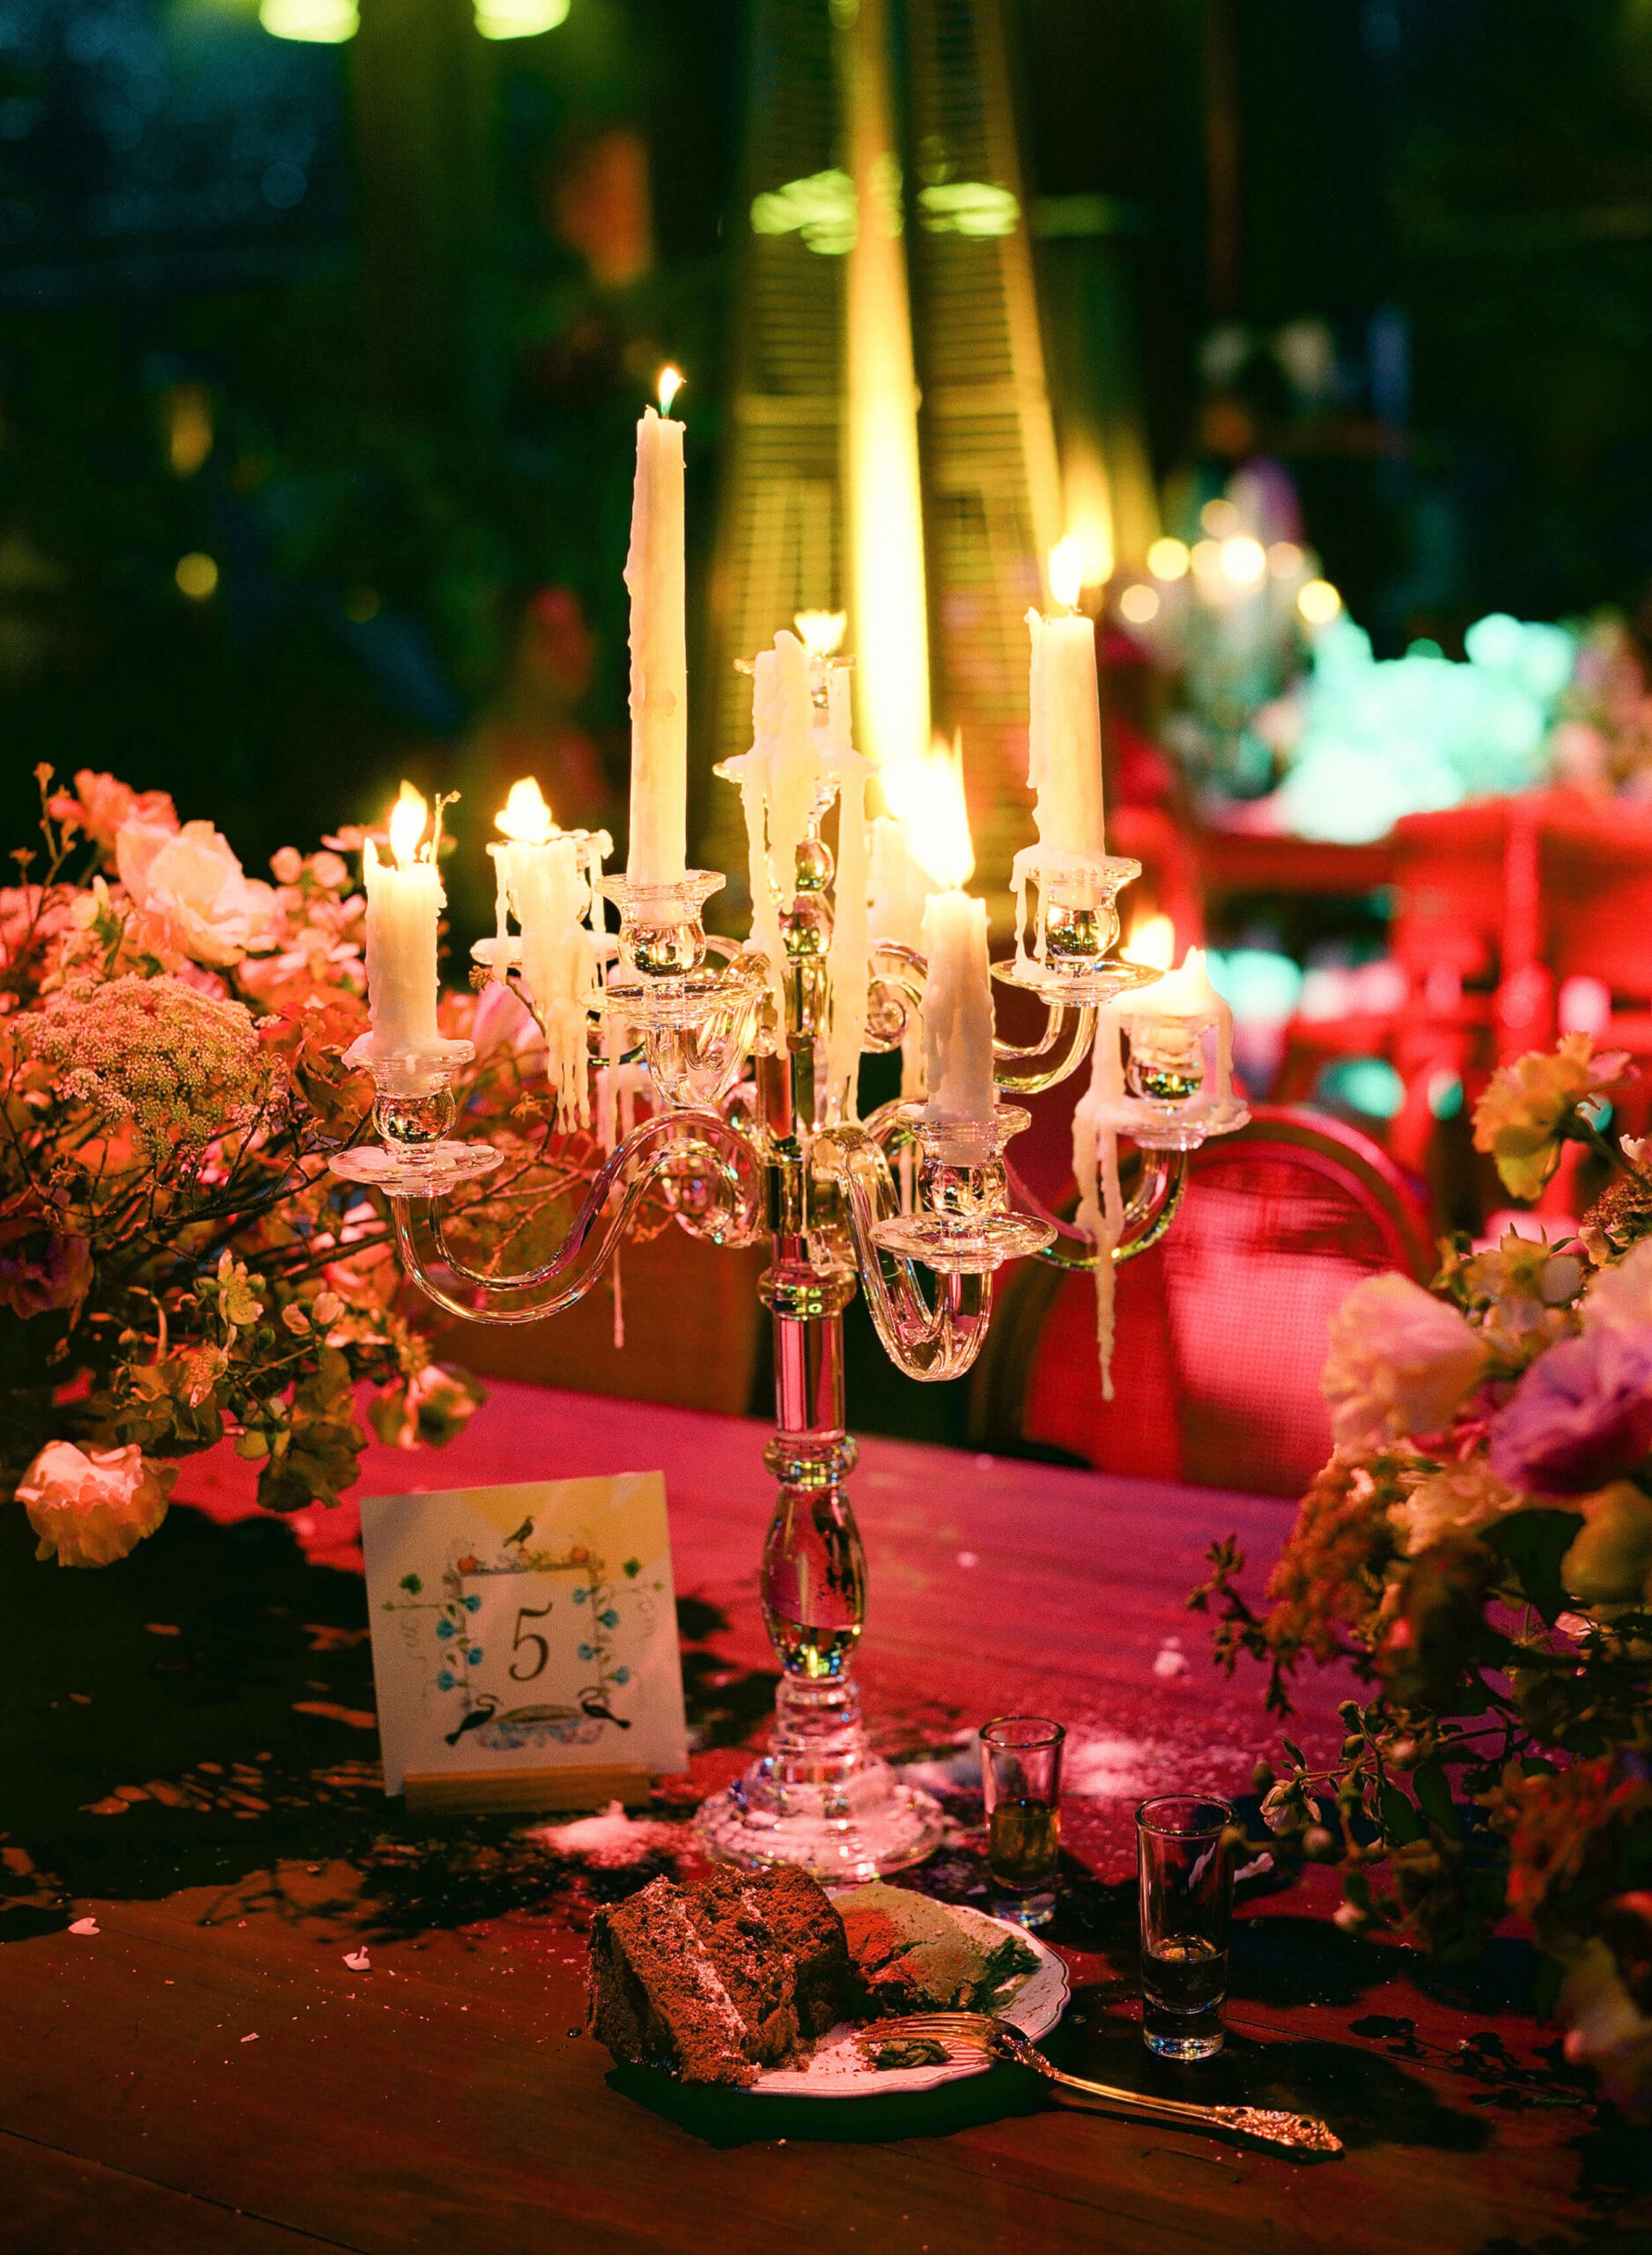 Crystal candelabras and flowers